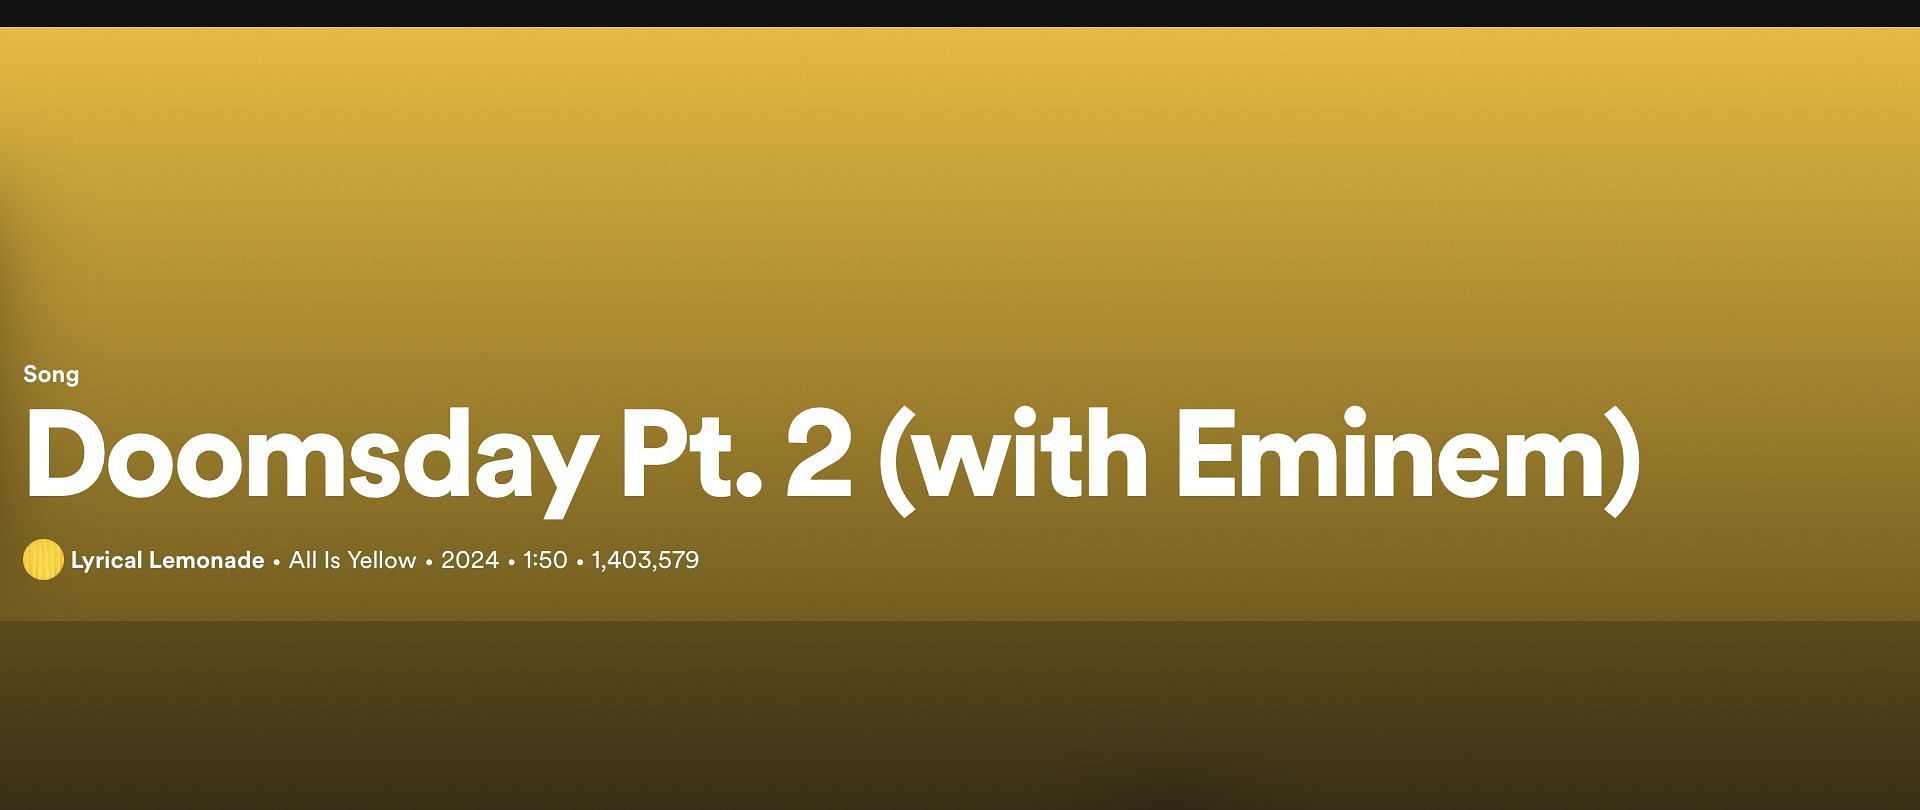 Track 9 from Lyrical Lemonade&#039;s All Is Yellow (Image via Spotify)